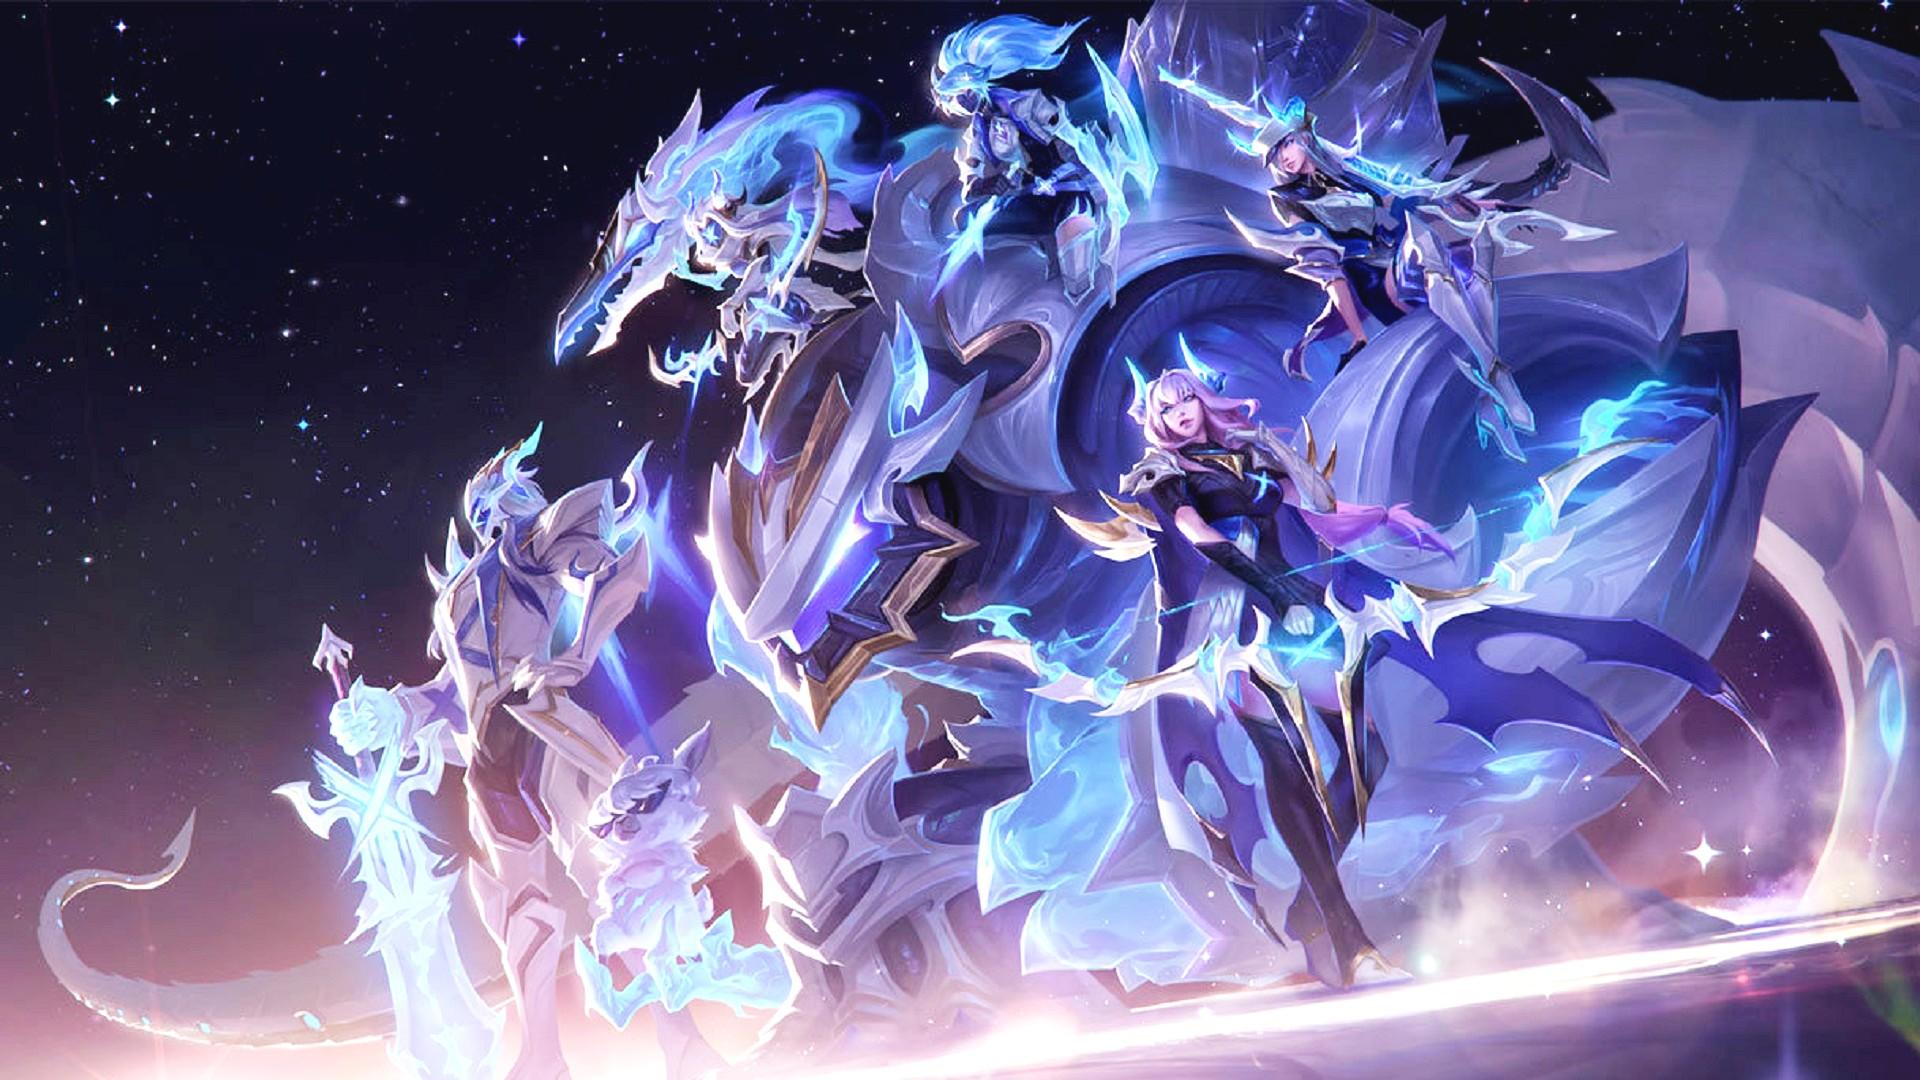 New and League of Legends skins